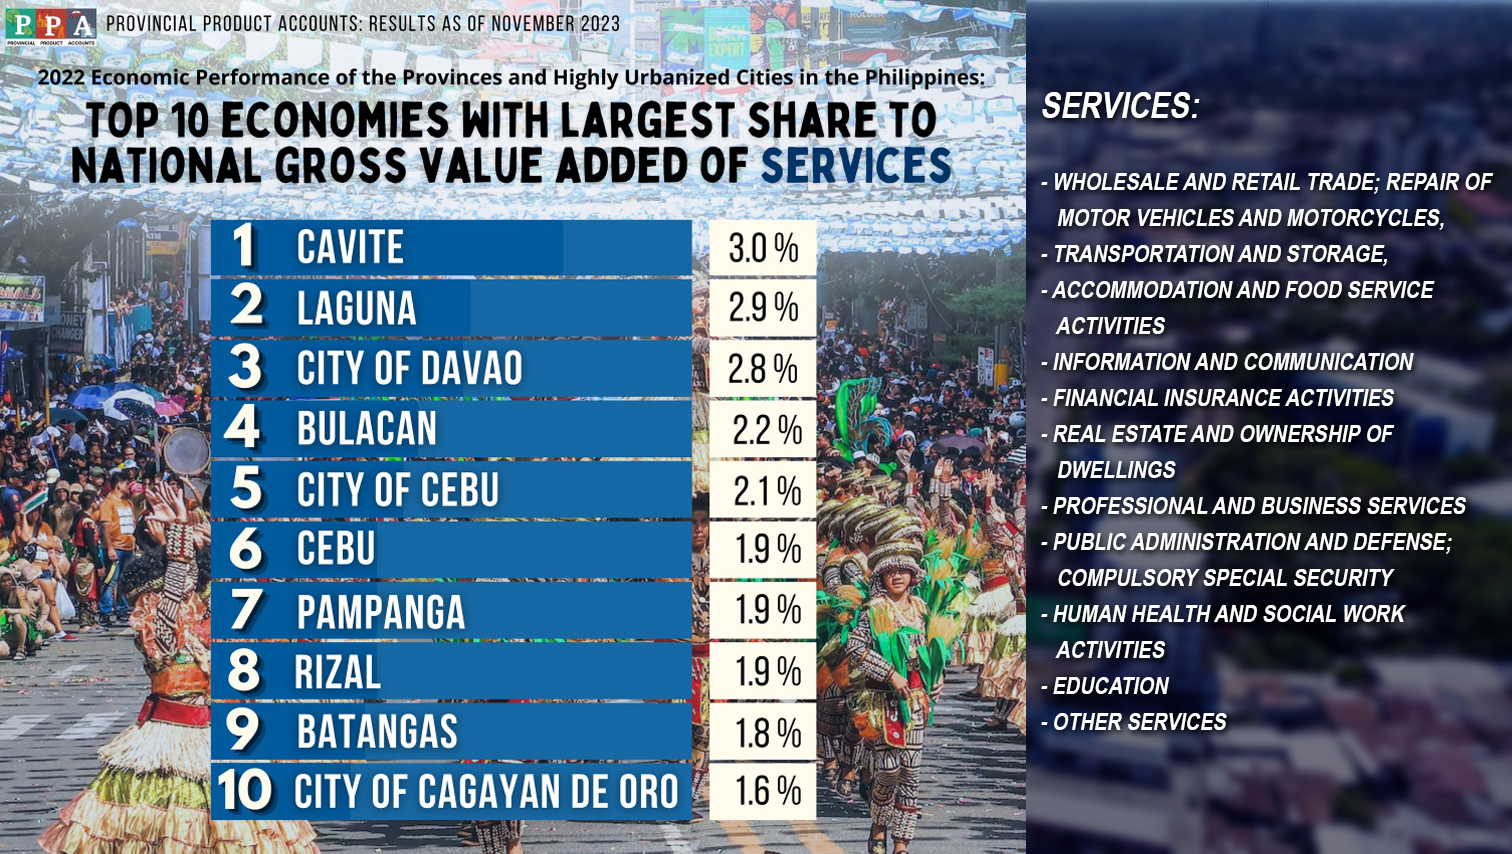 PROGRESS WATCH: Cagayan de Oro among Top 10 economies with largest share to National Gross Value added of Services